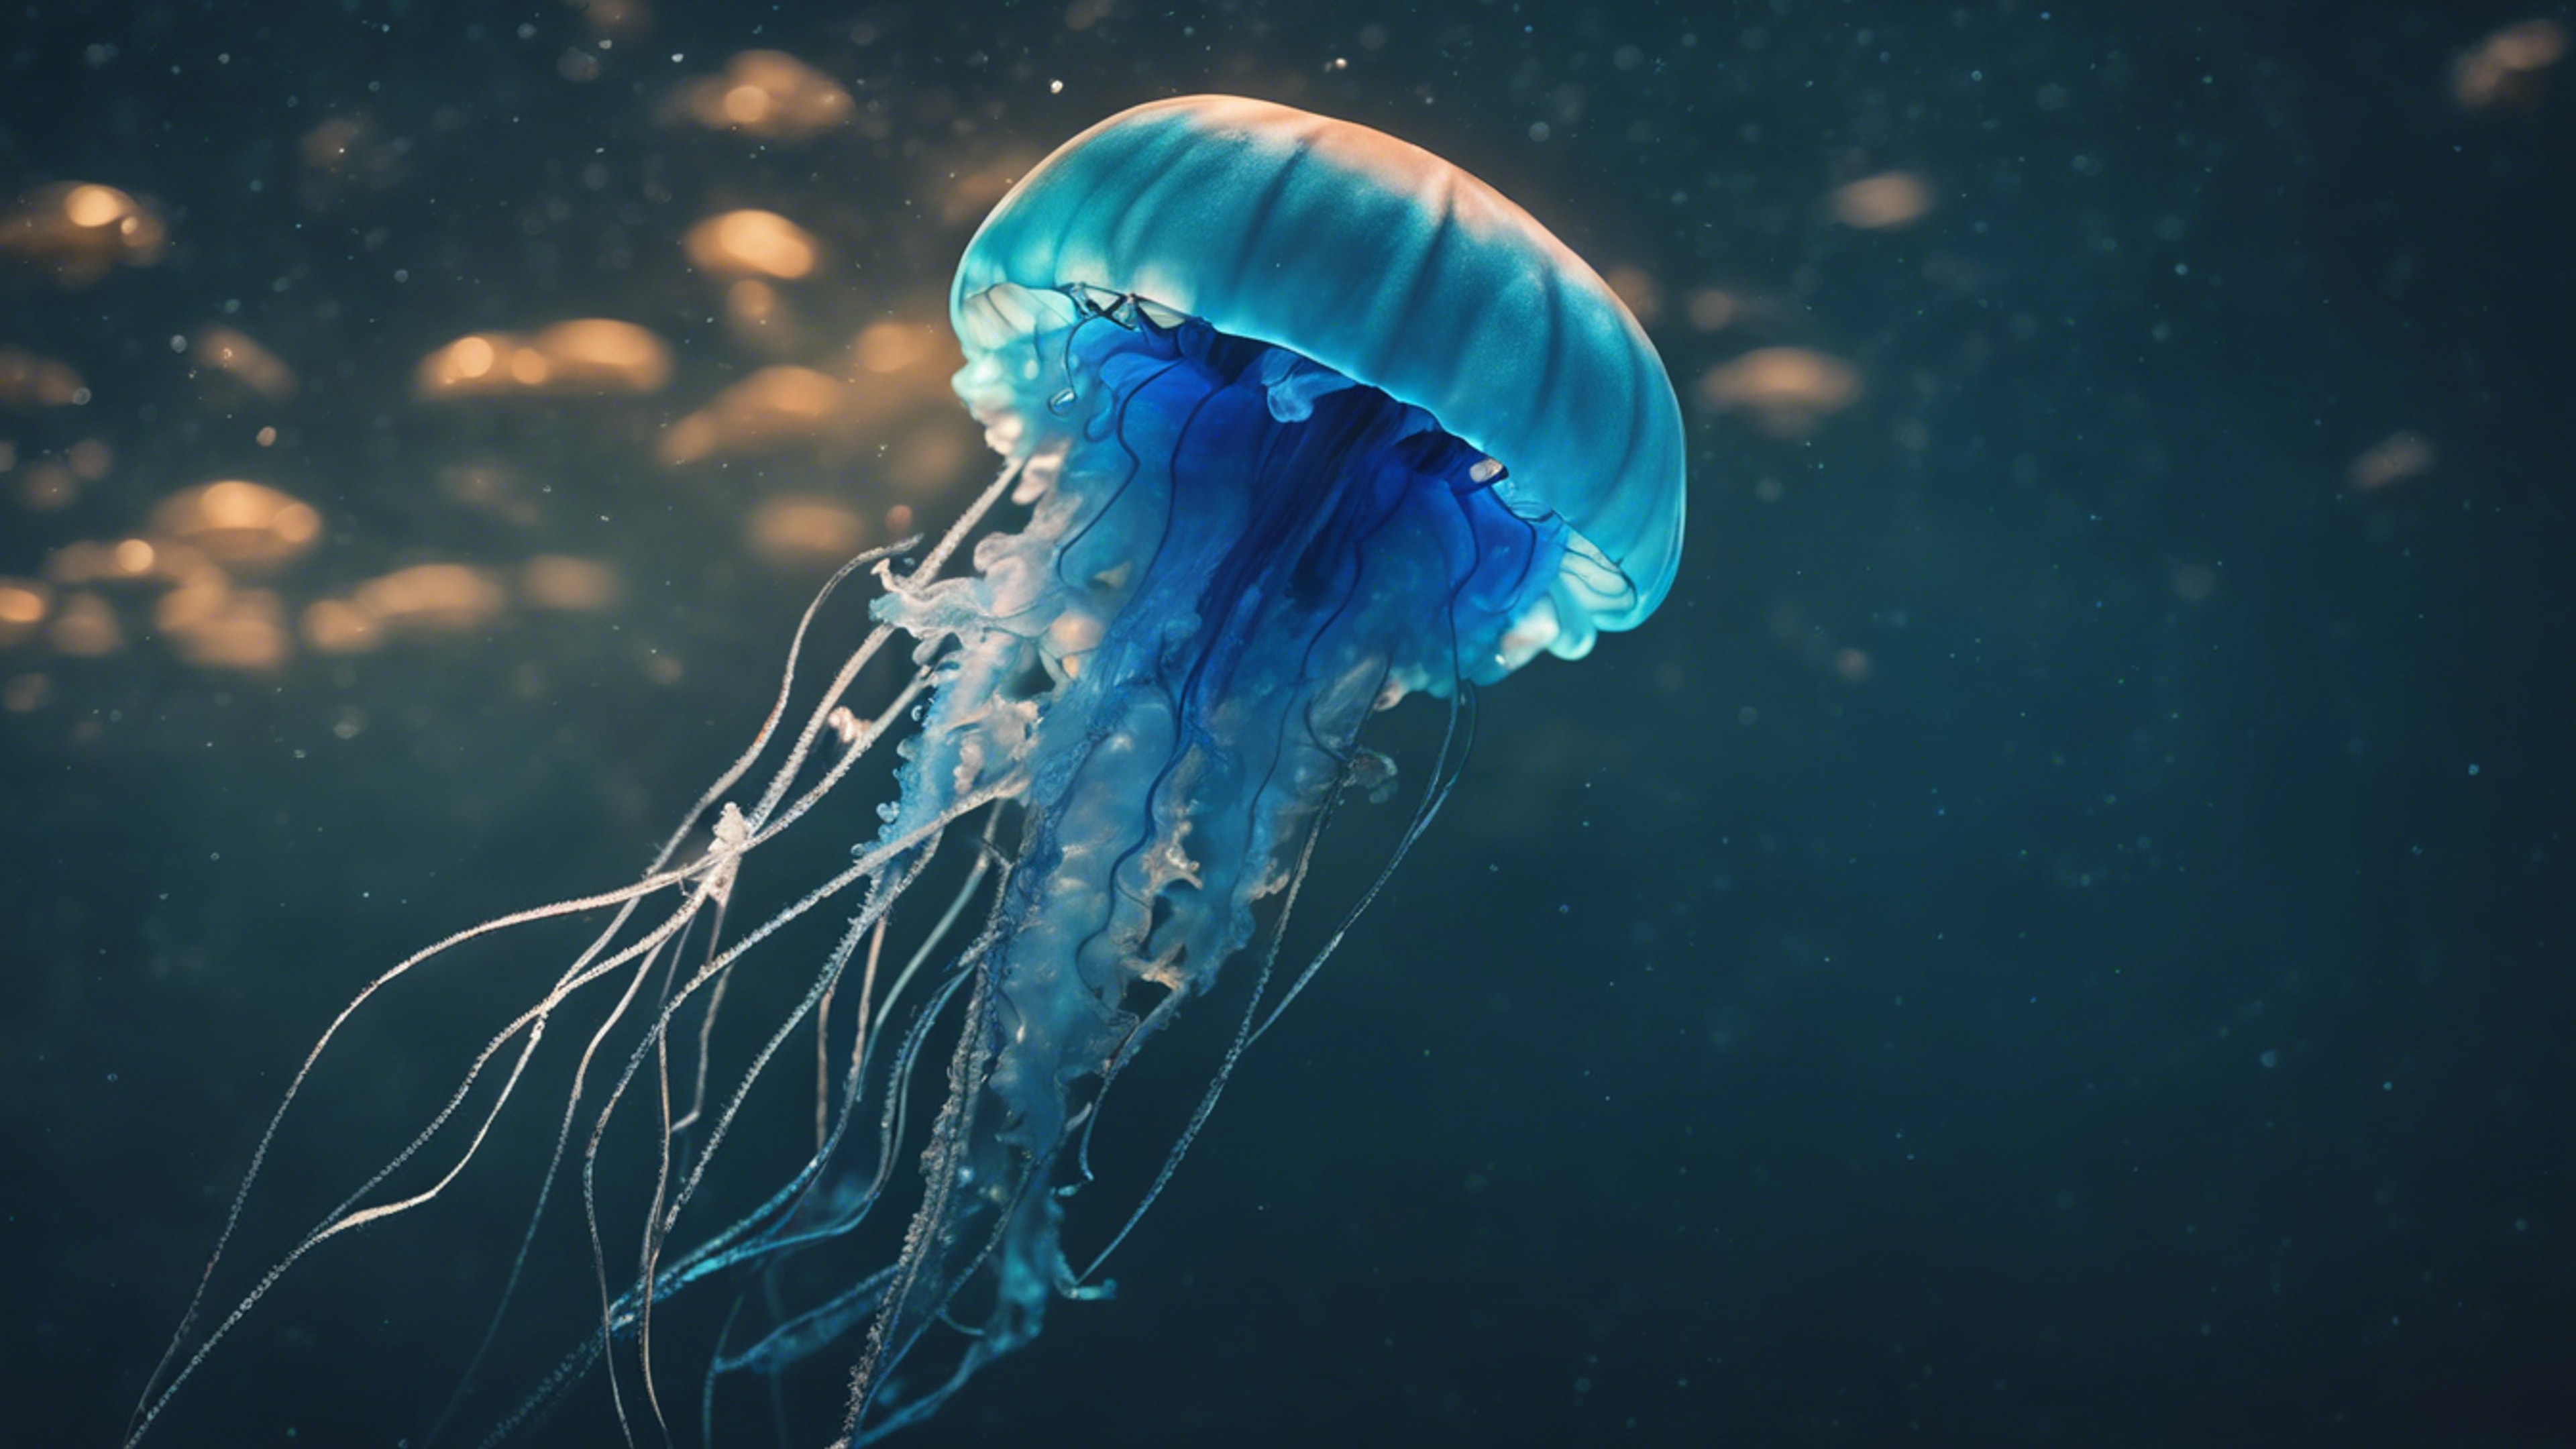 A neon blue jellyfish gracefully floating in the dark ocean depths. Валлпапер[de52a1967abe4ca3a1c8]